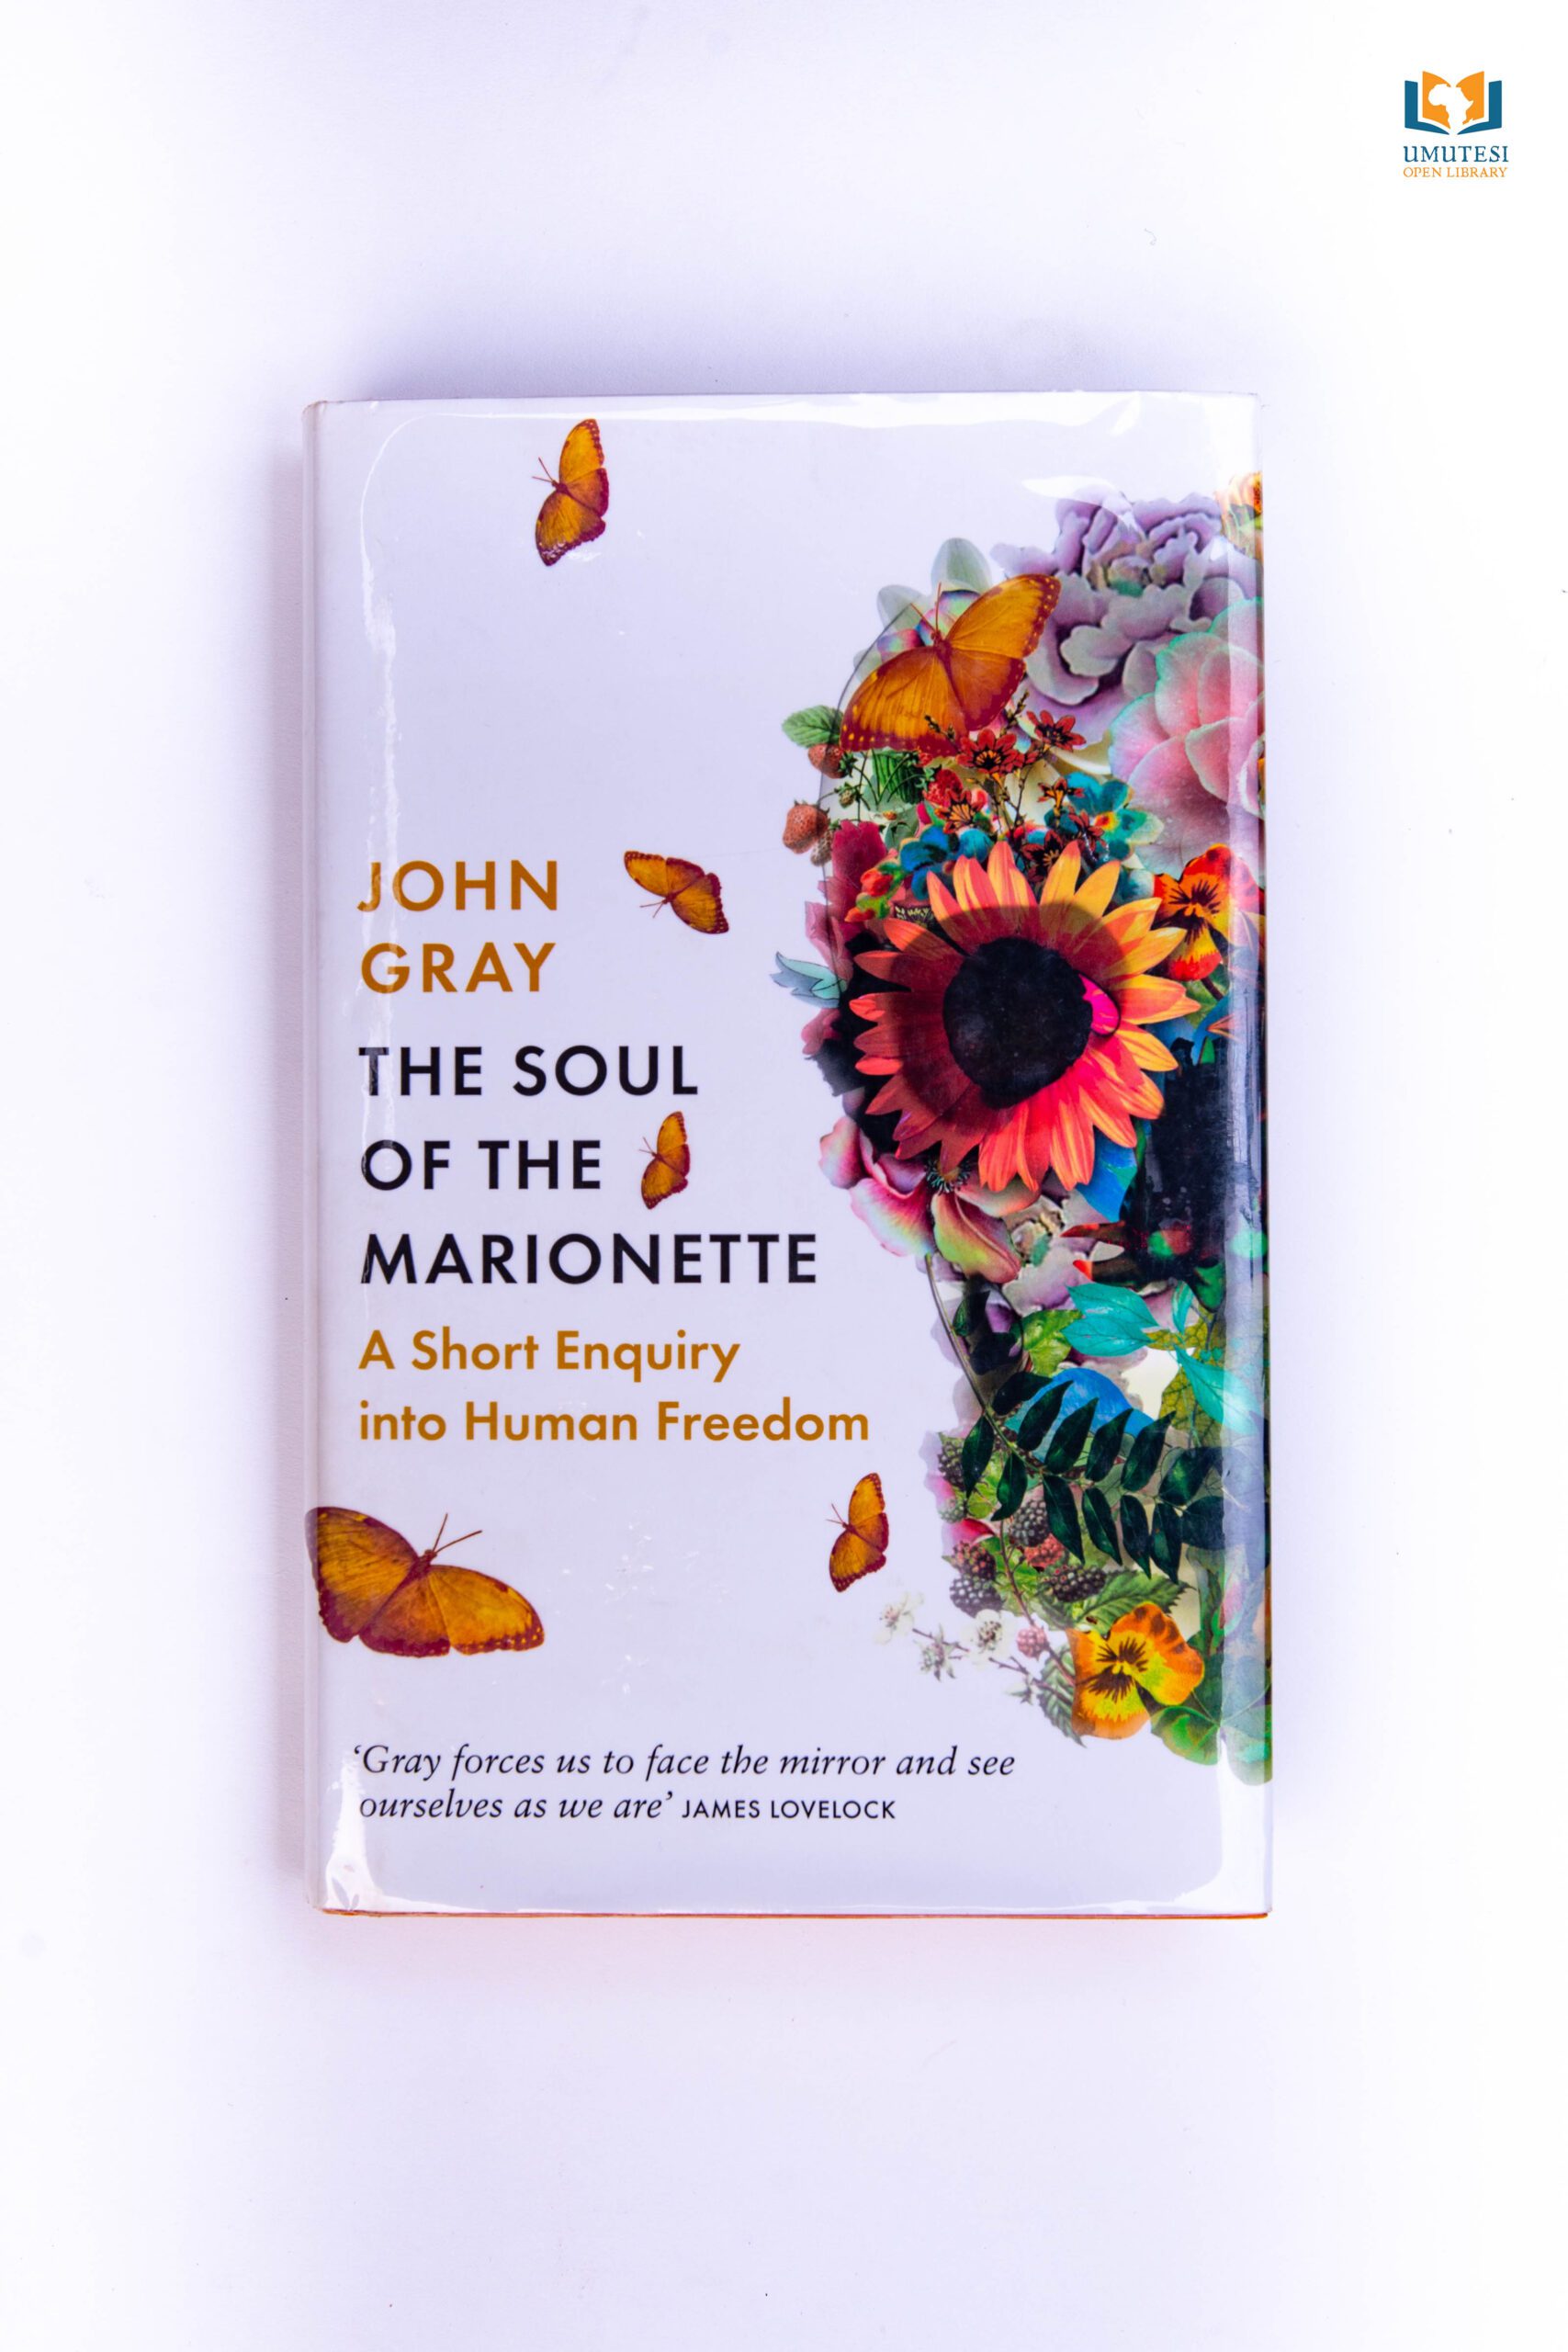 The Soul of the Marionette: A Short Inquiry Into Human Freedom by John Gray